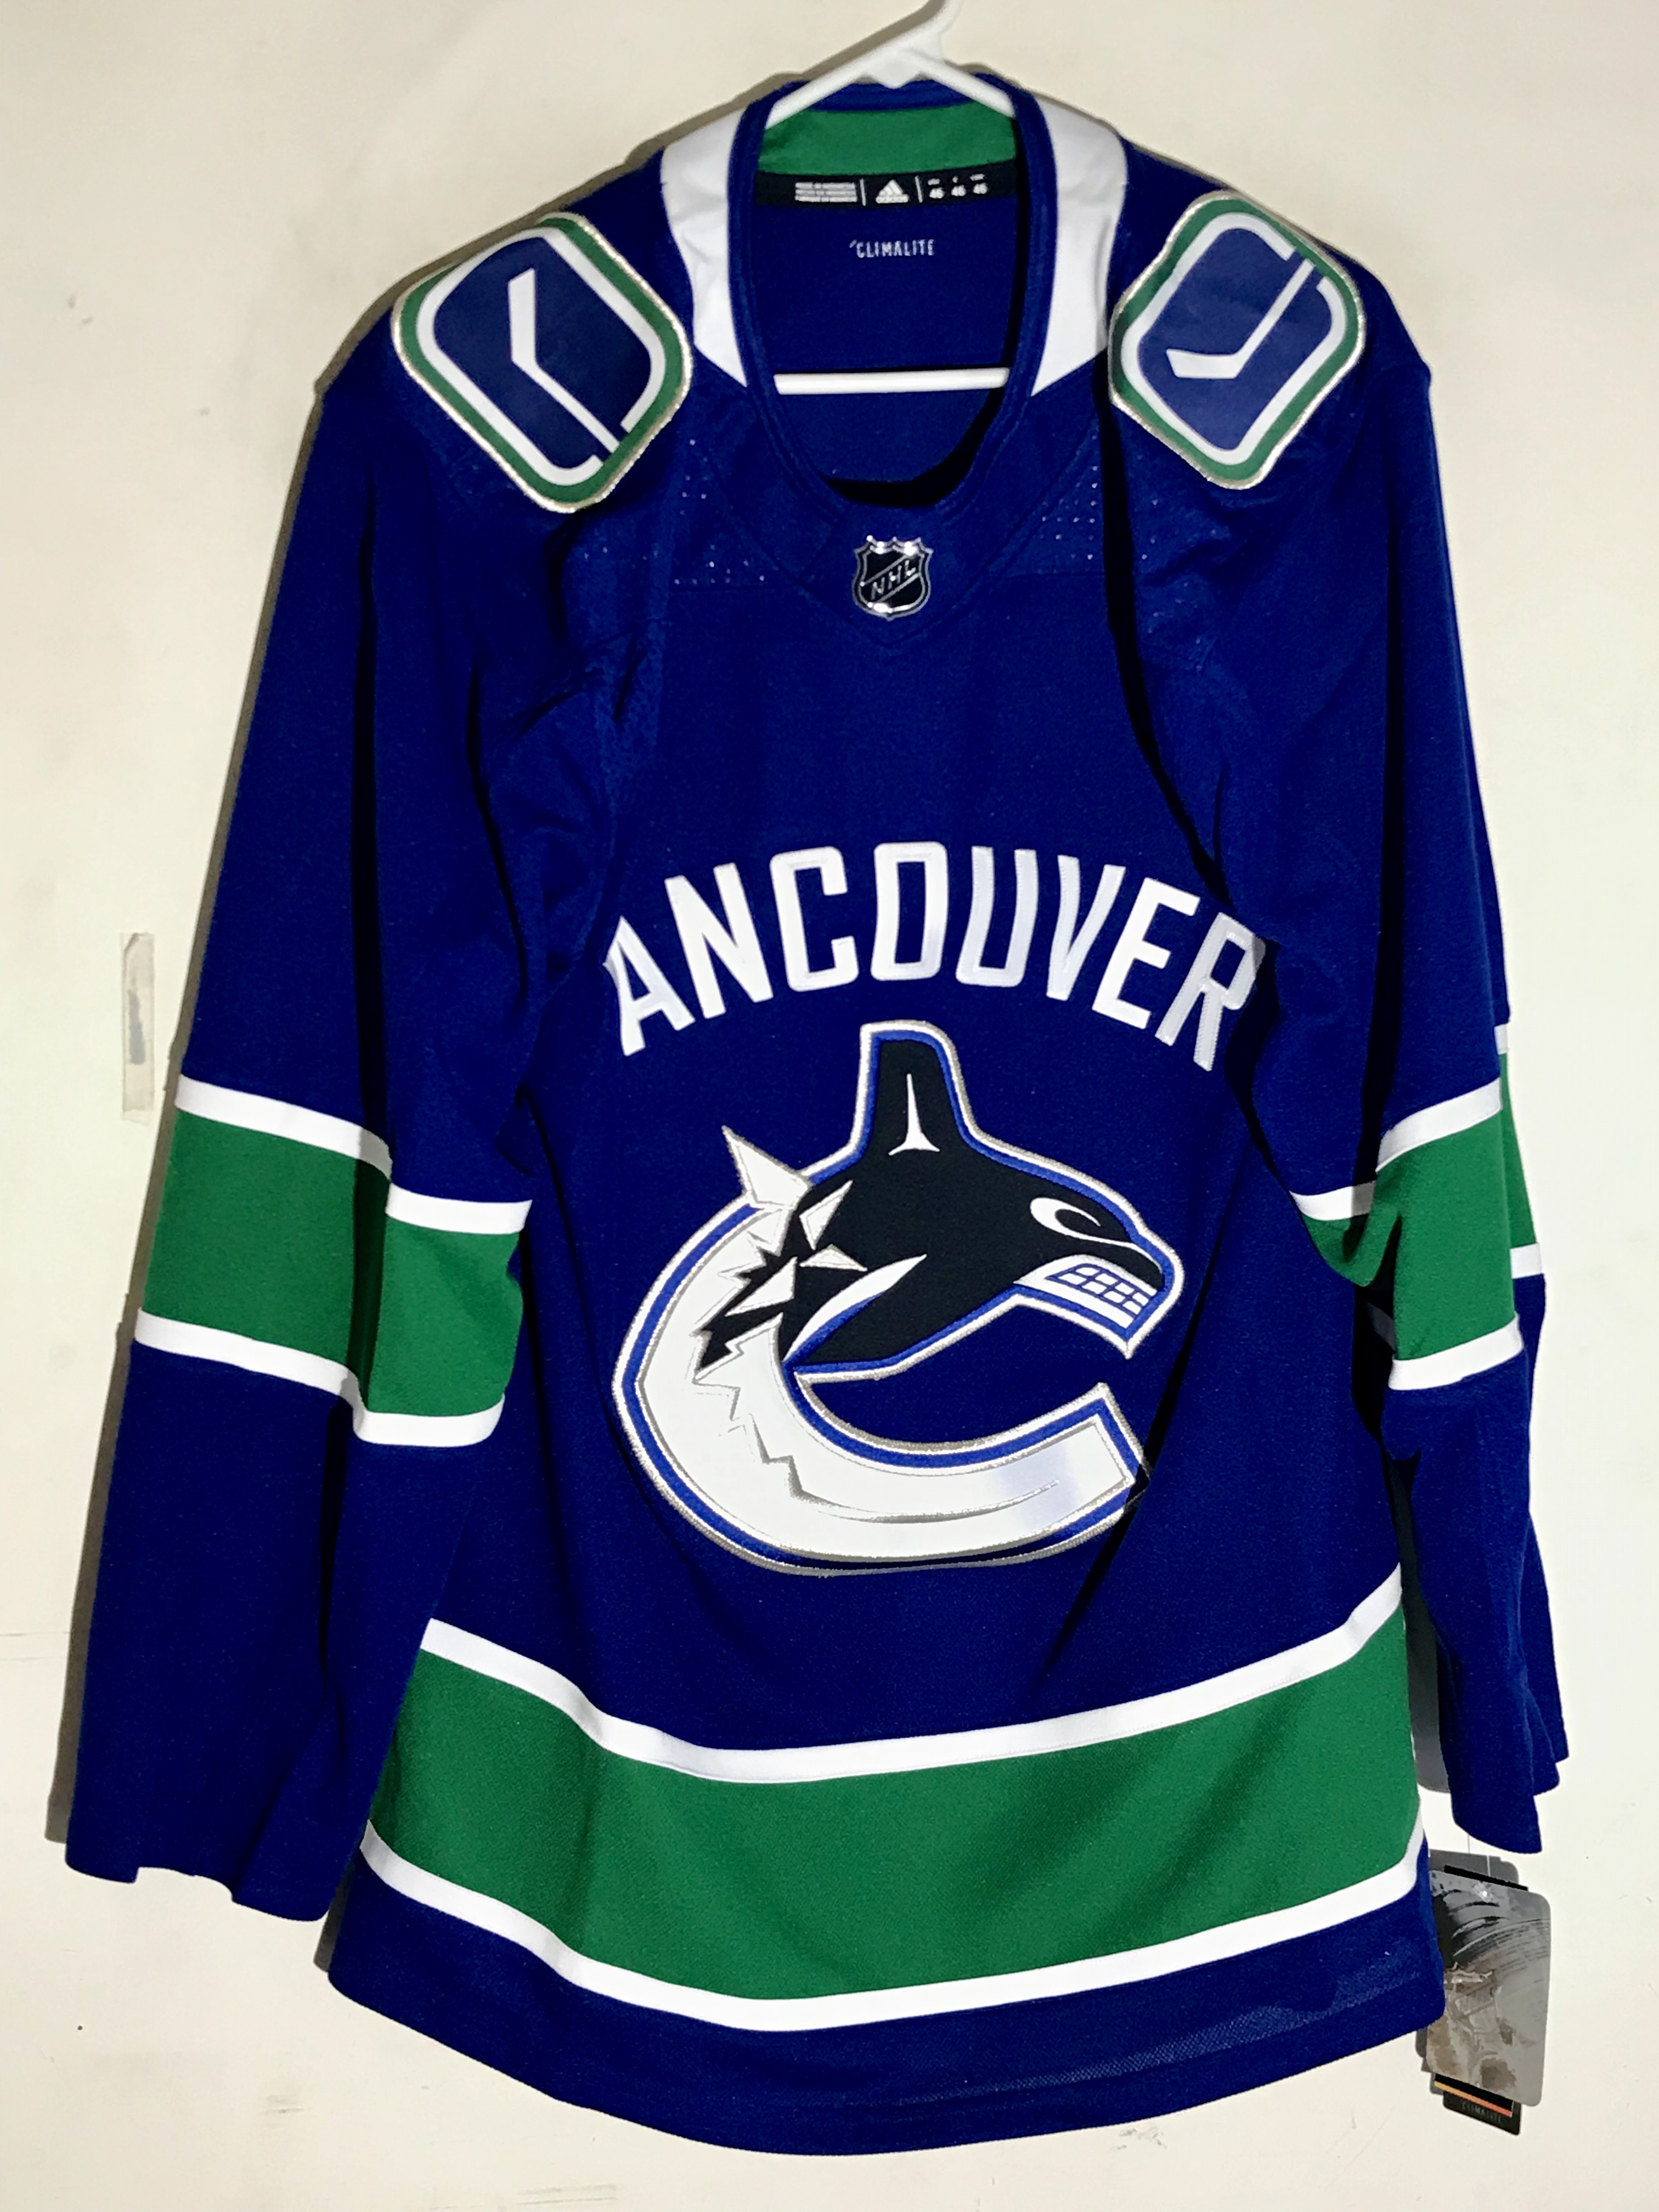 adidas authentic nhl jersey